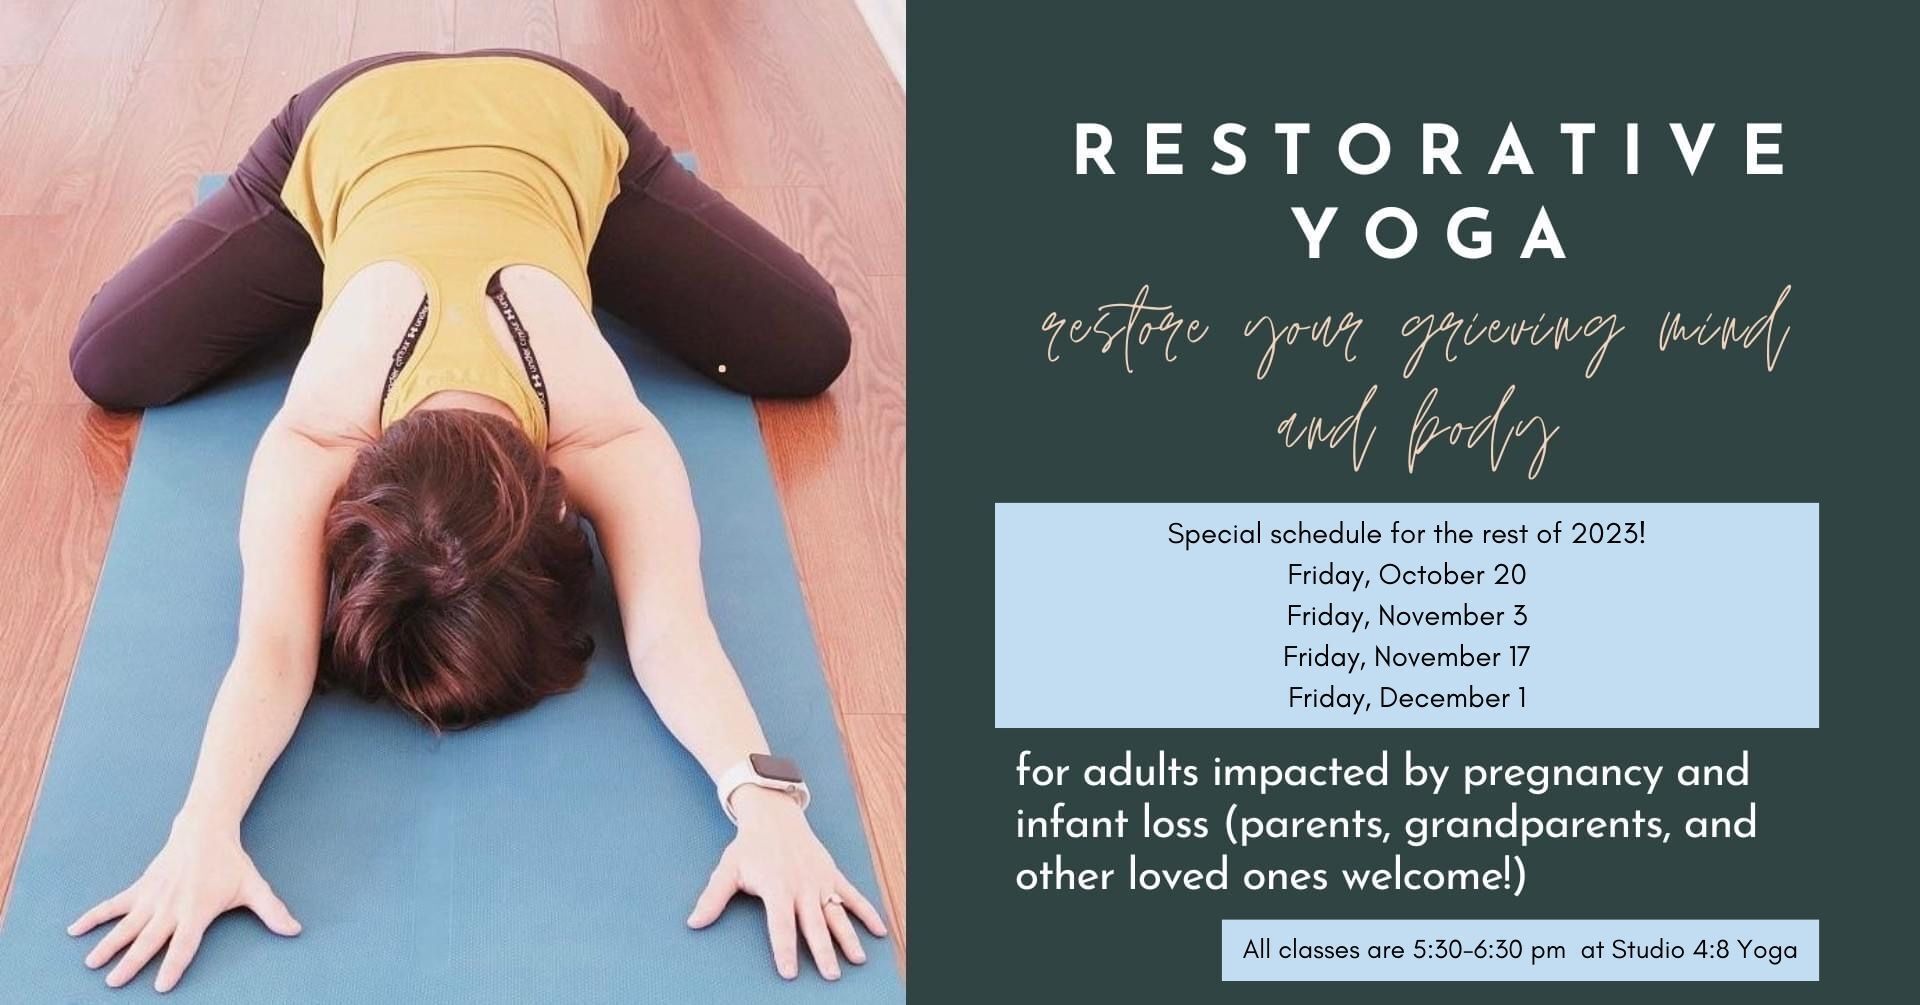 Restorative Yoga for the rest of 2023!